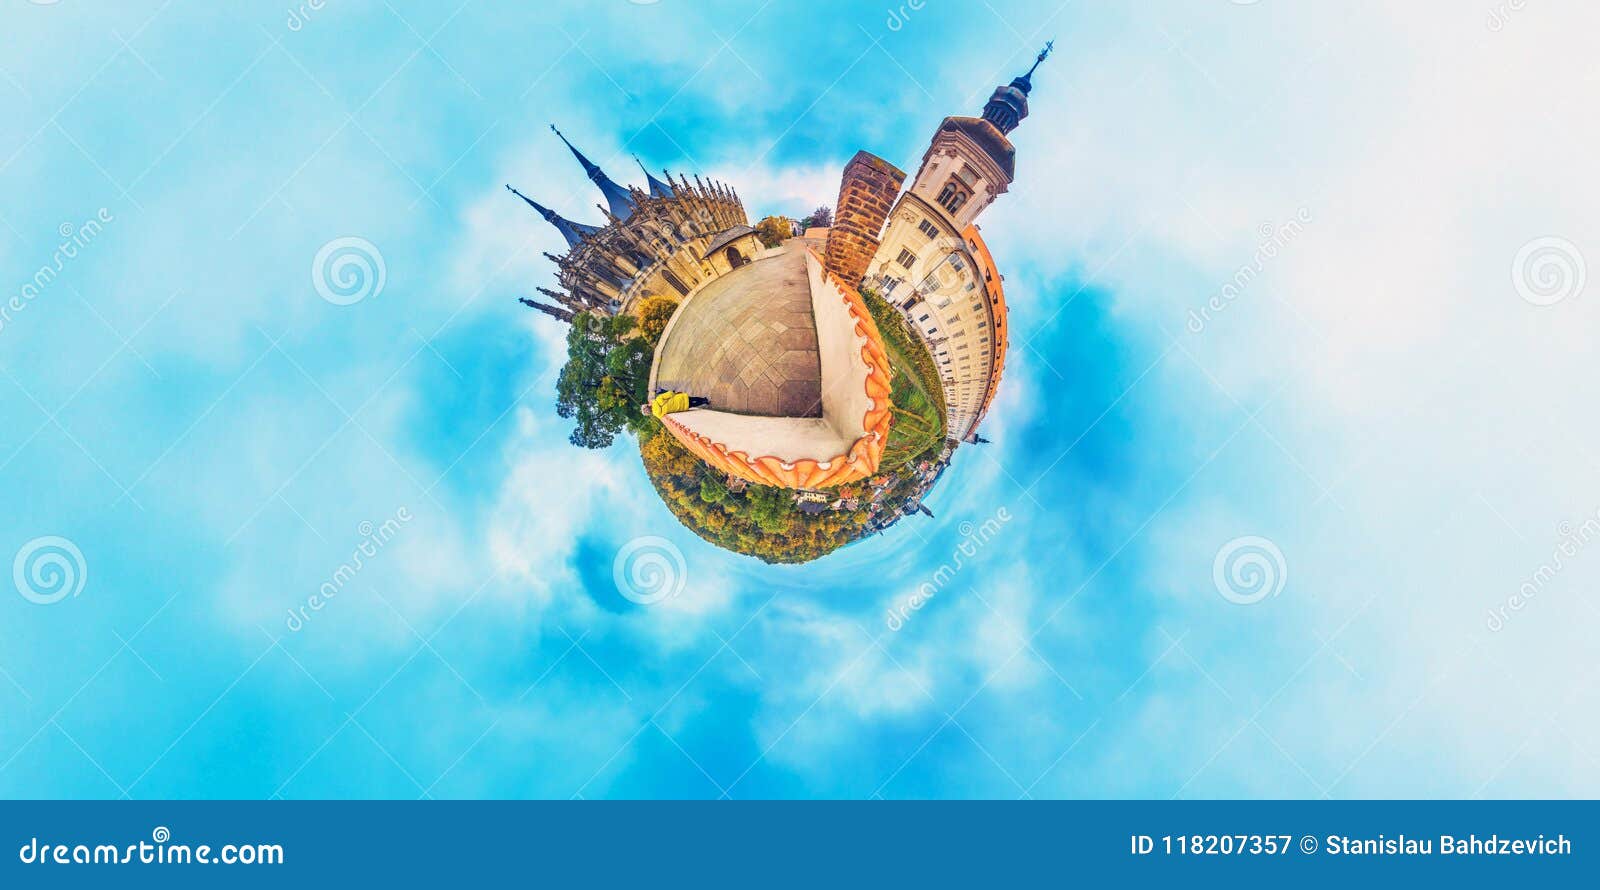 orange little planet panorama with cathedrals and cyan sky. europe, czech, kutna gora.